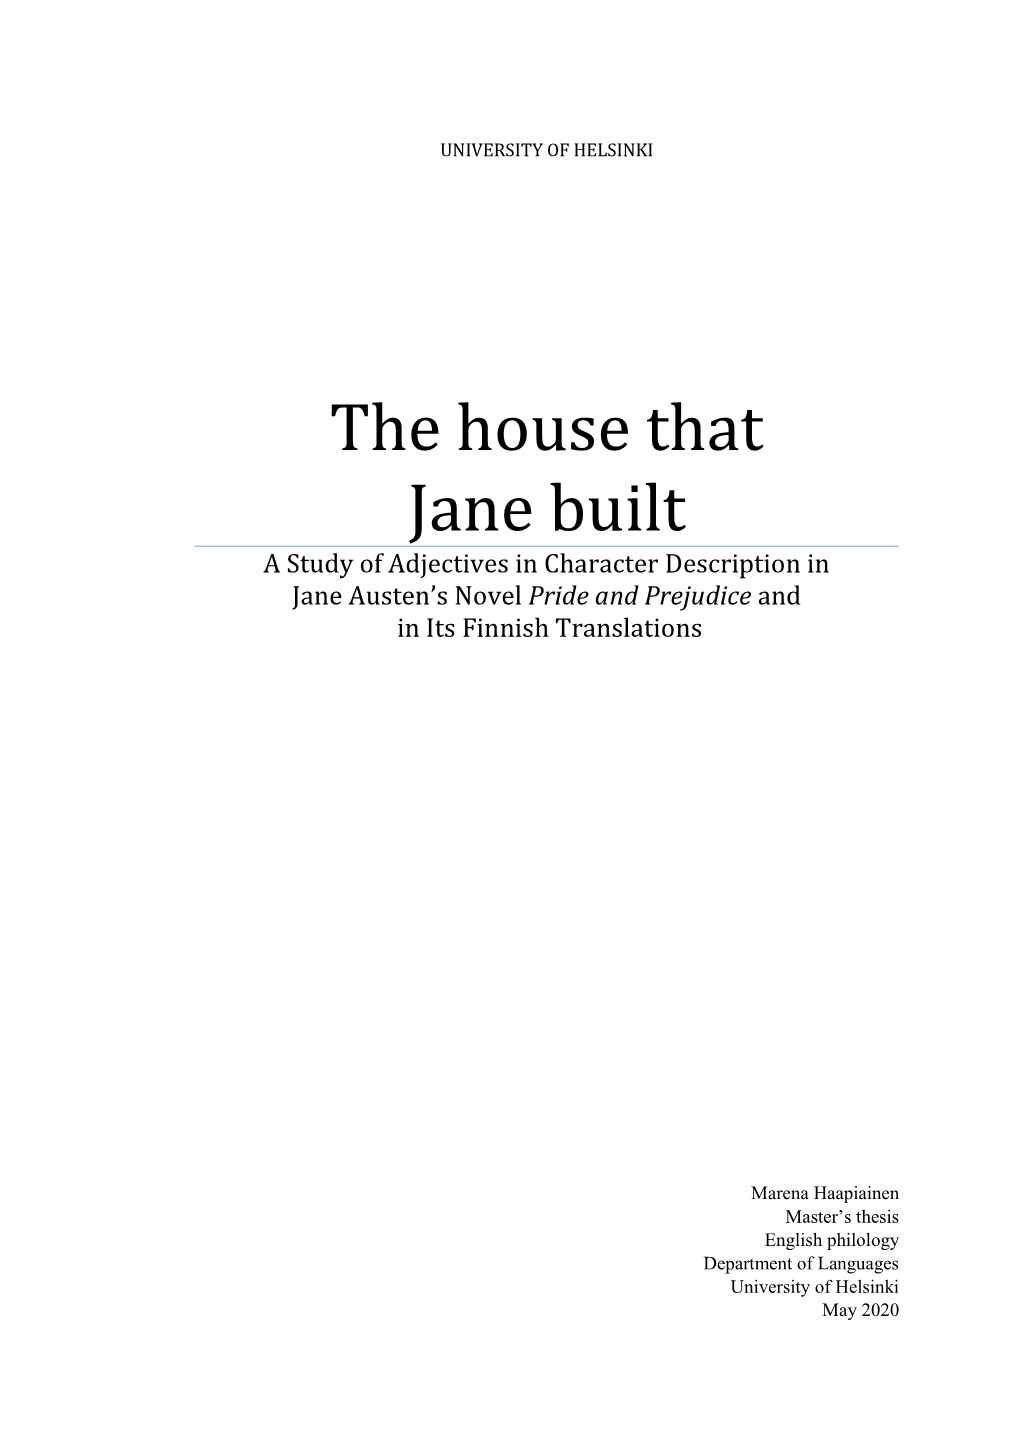 The House That Jane Built